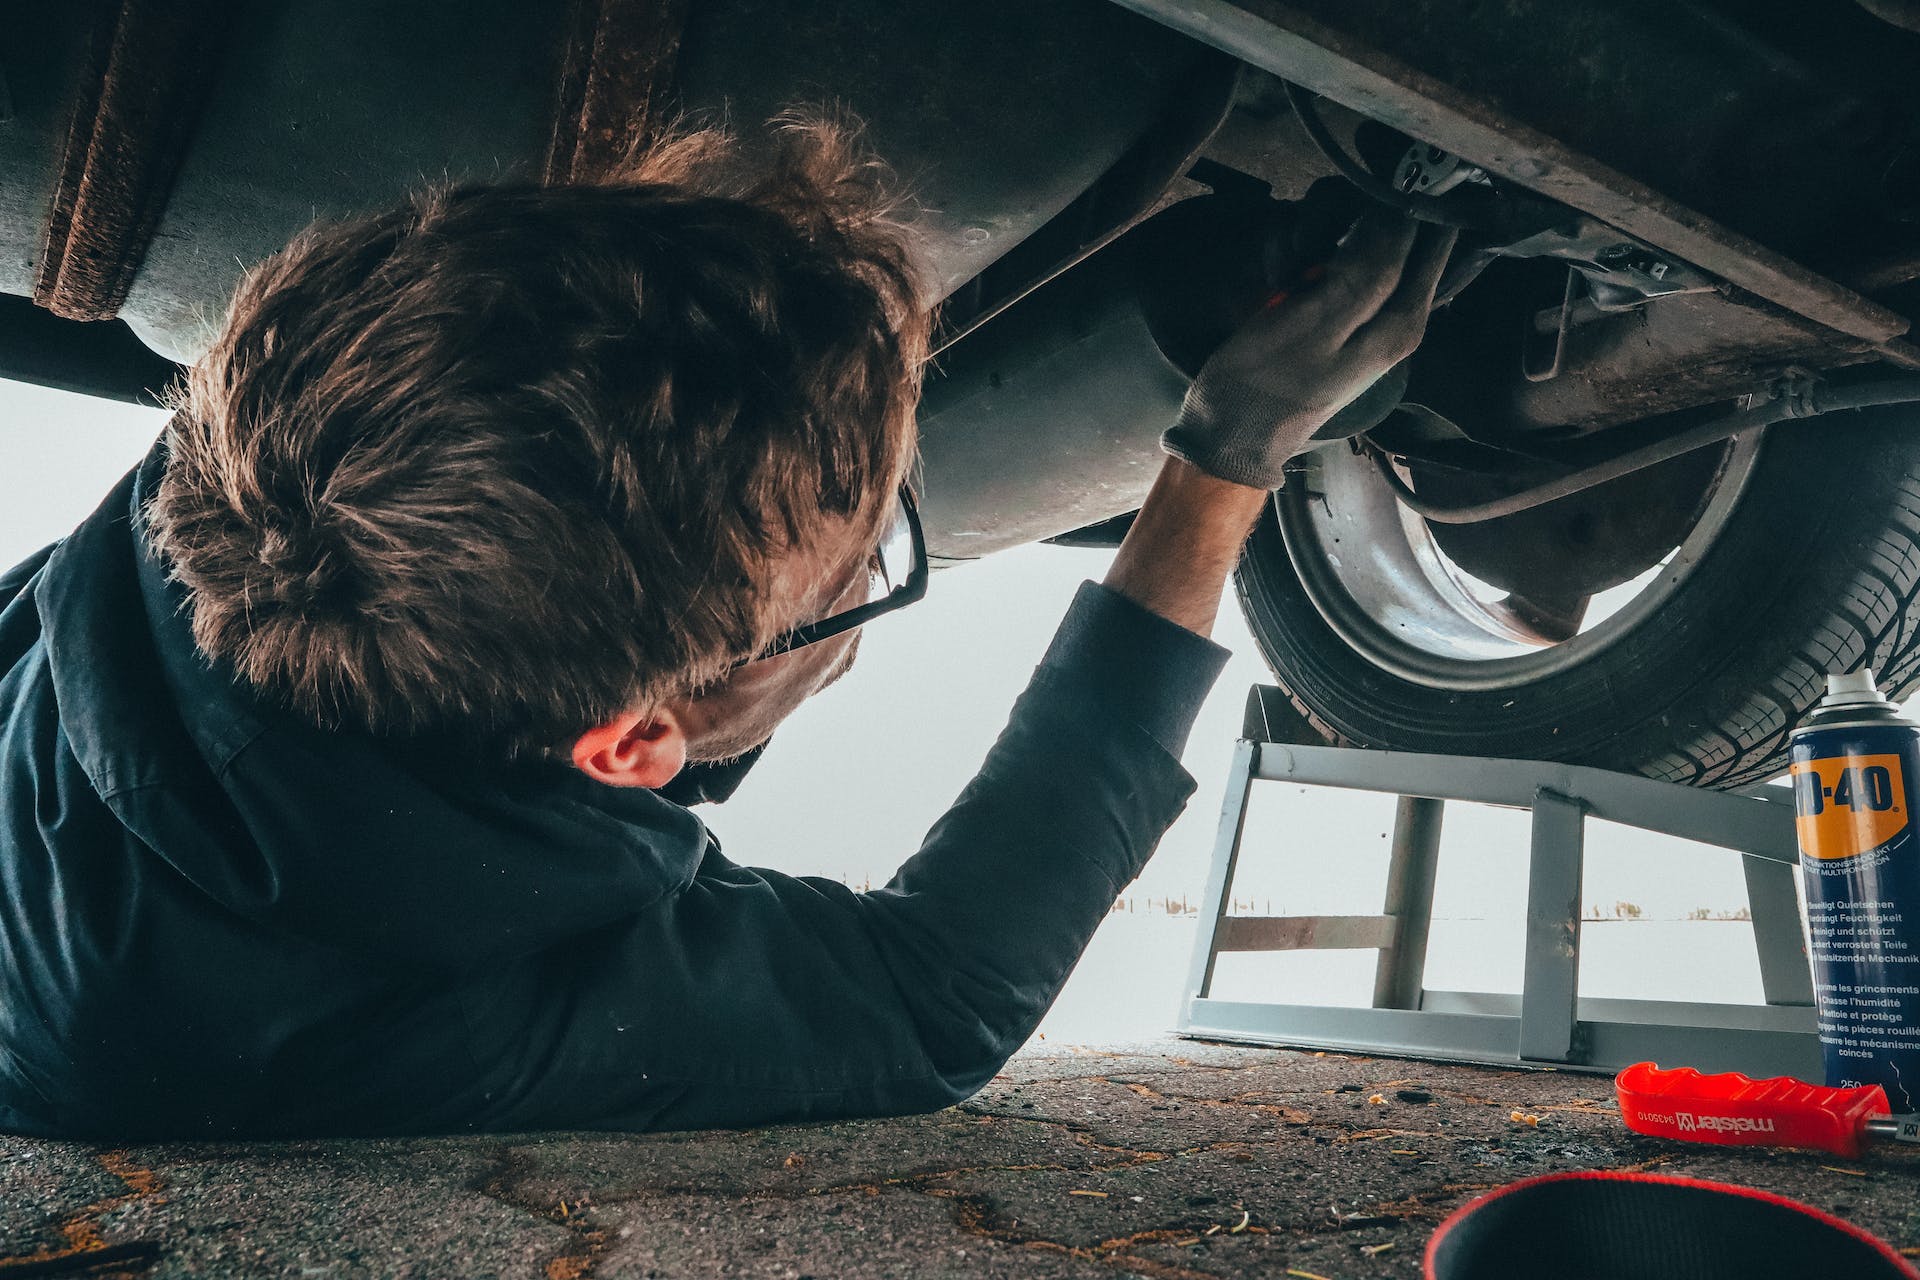 A man fixing a vehicle's engine | Source: Pexels